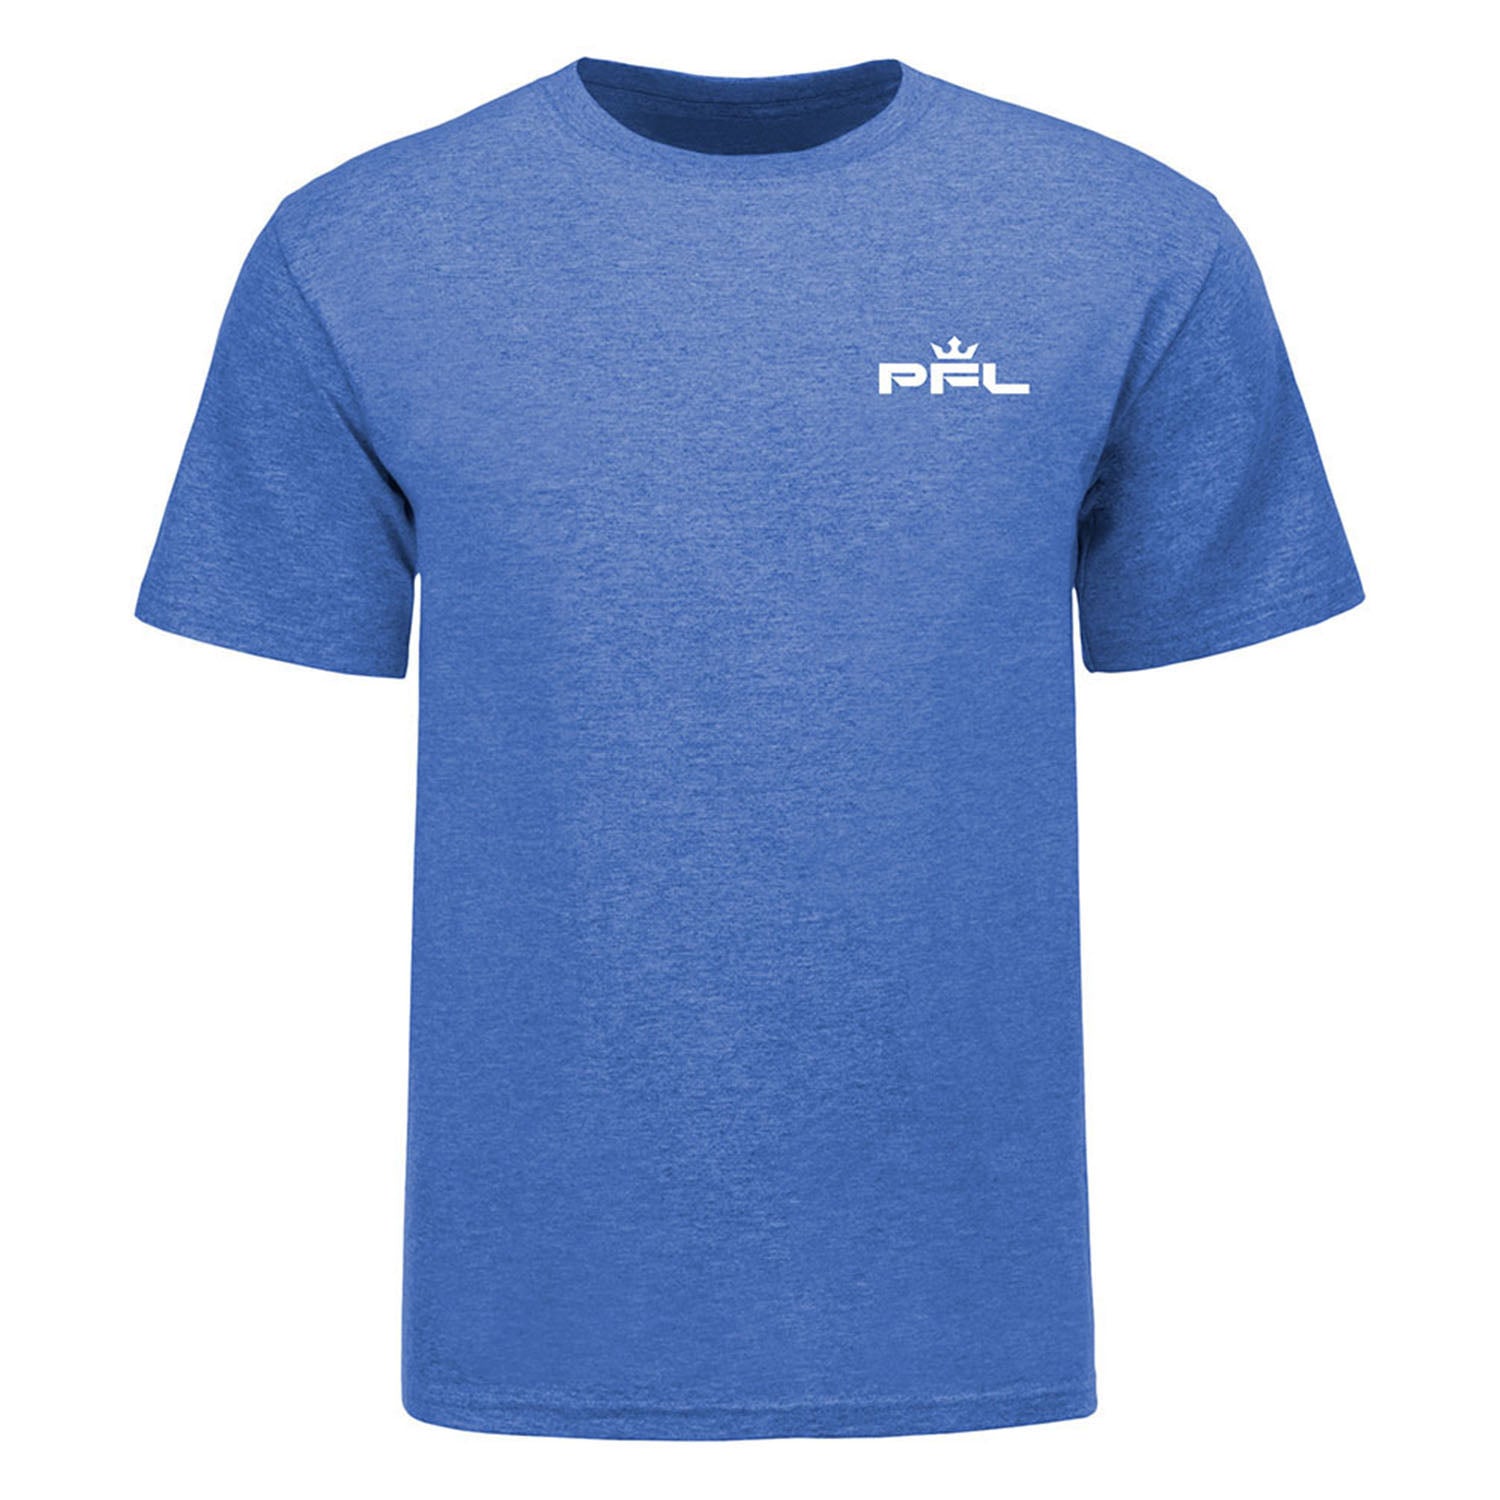 PFL Logo T-Shirt in Blue - Back View